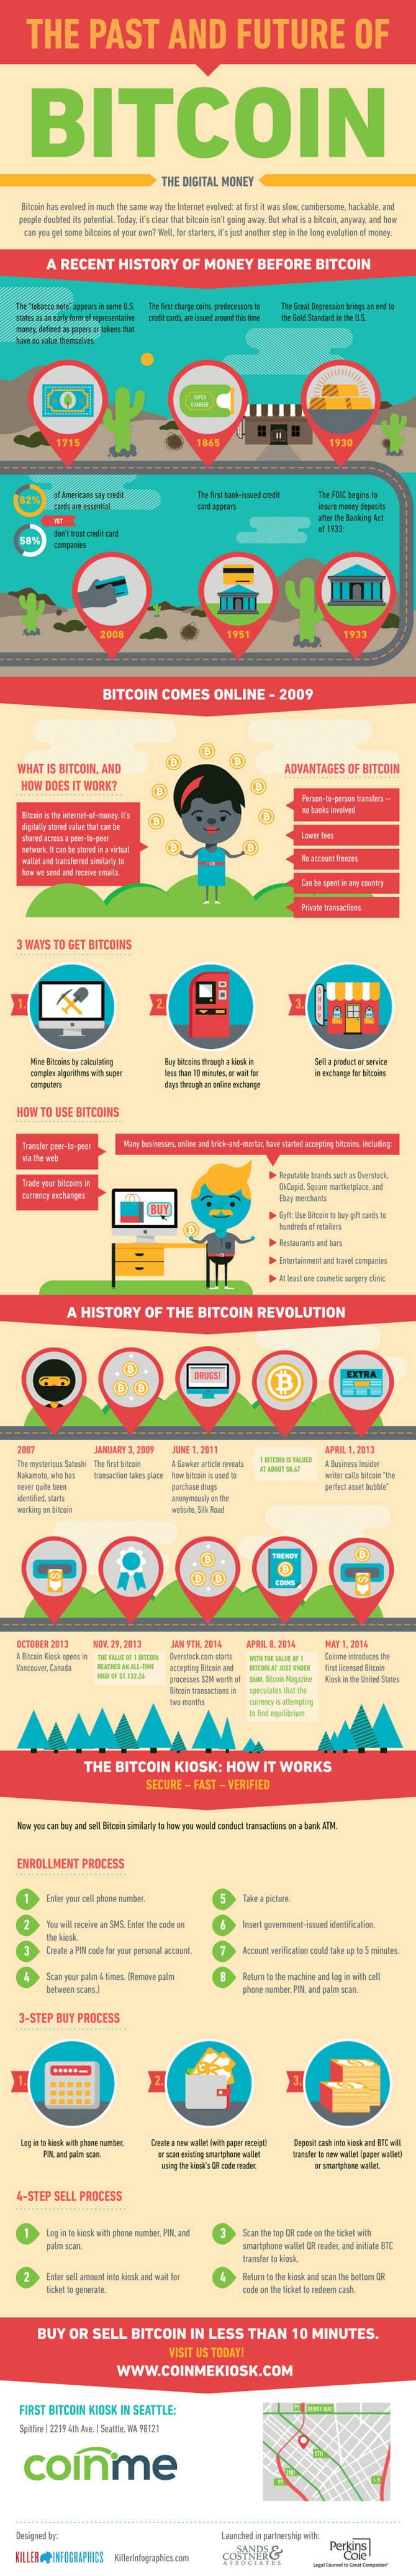 The Past and Future of Bitcoin [Infographic]